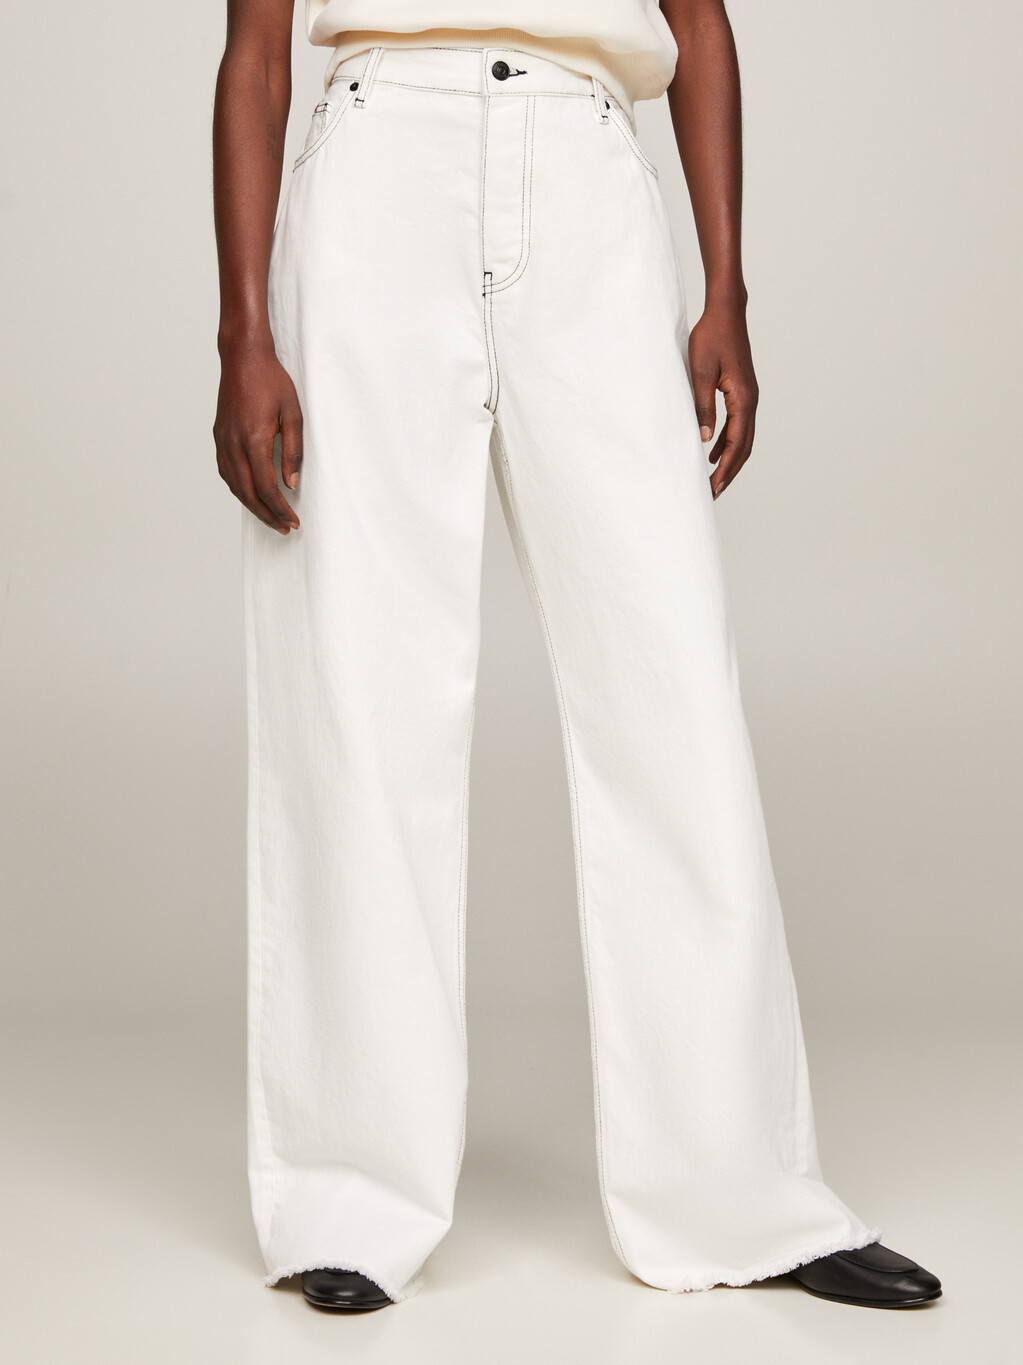 Mid Rise Oversized Slouchy White Jeans, Ecru, hi-res